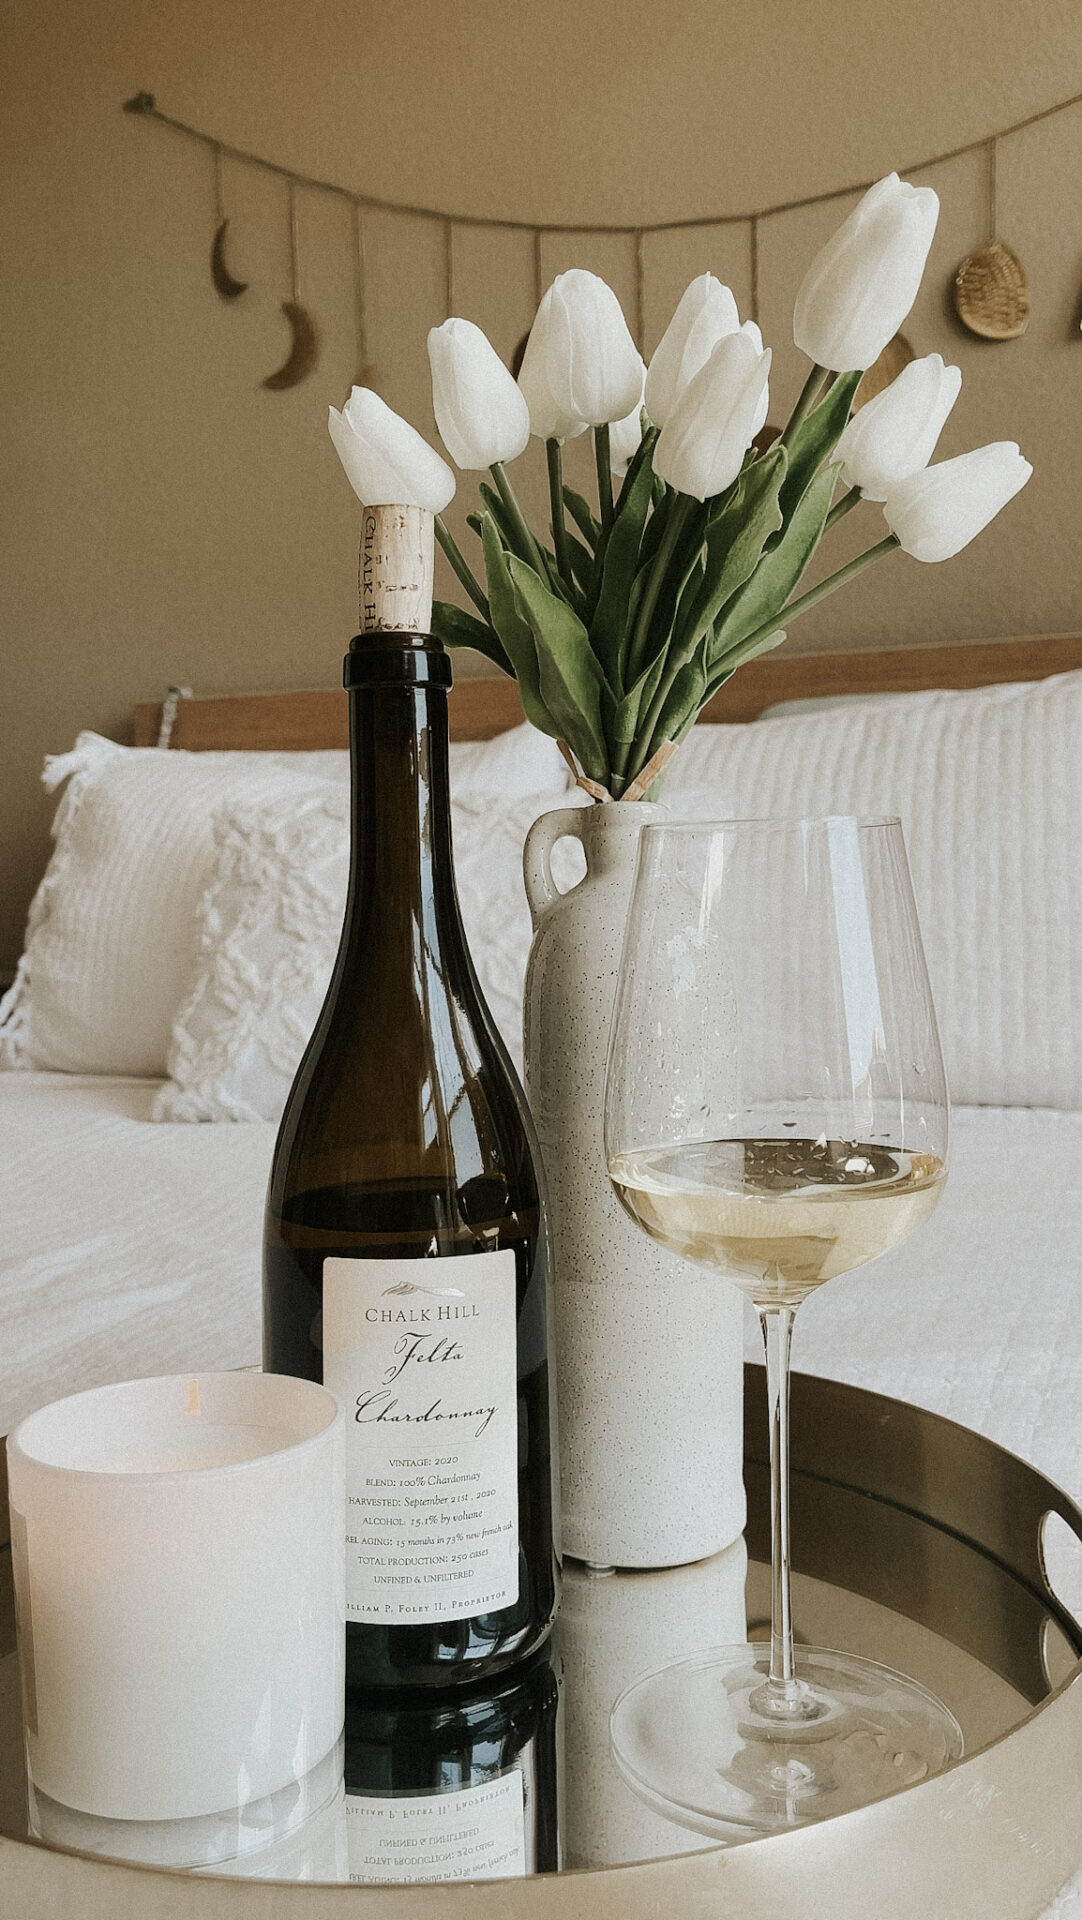 A bottle of Chardonnay on a try with a glass of wine next to it, a candle, and a vase of white tulips.